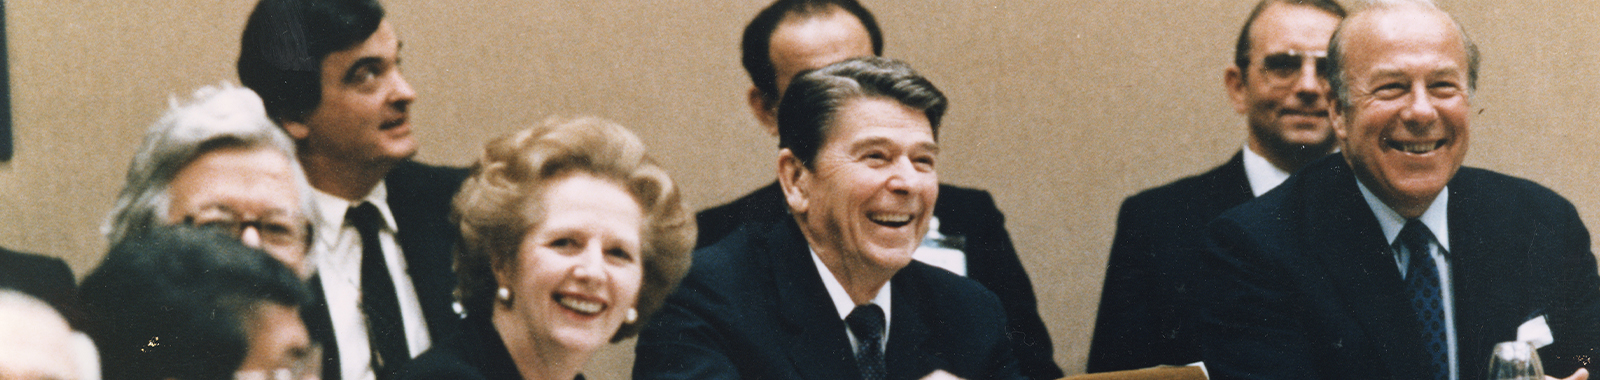 detail of a color photo showing Margaret Thatcher, Ronald Reagan, and George Shultz at the United Nations